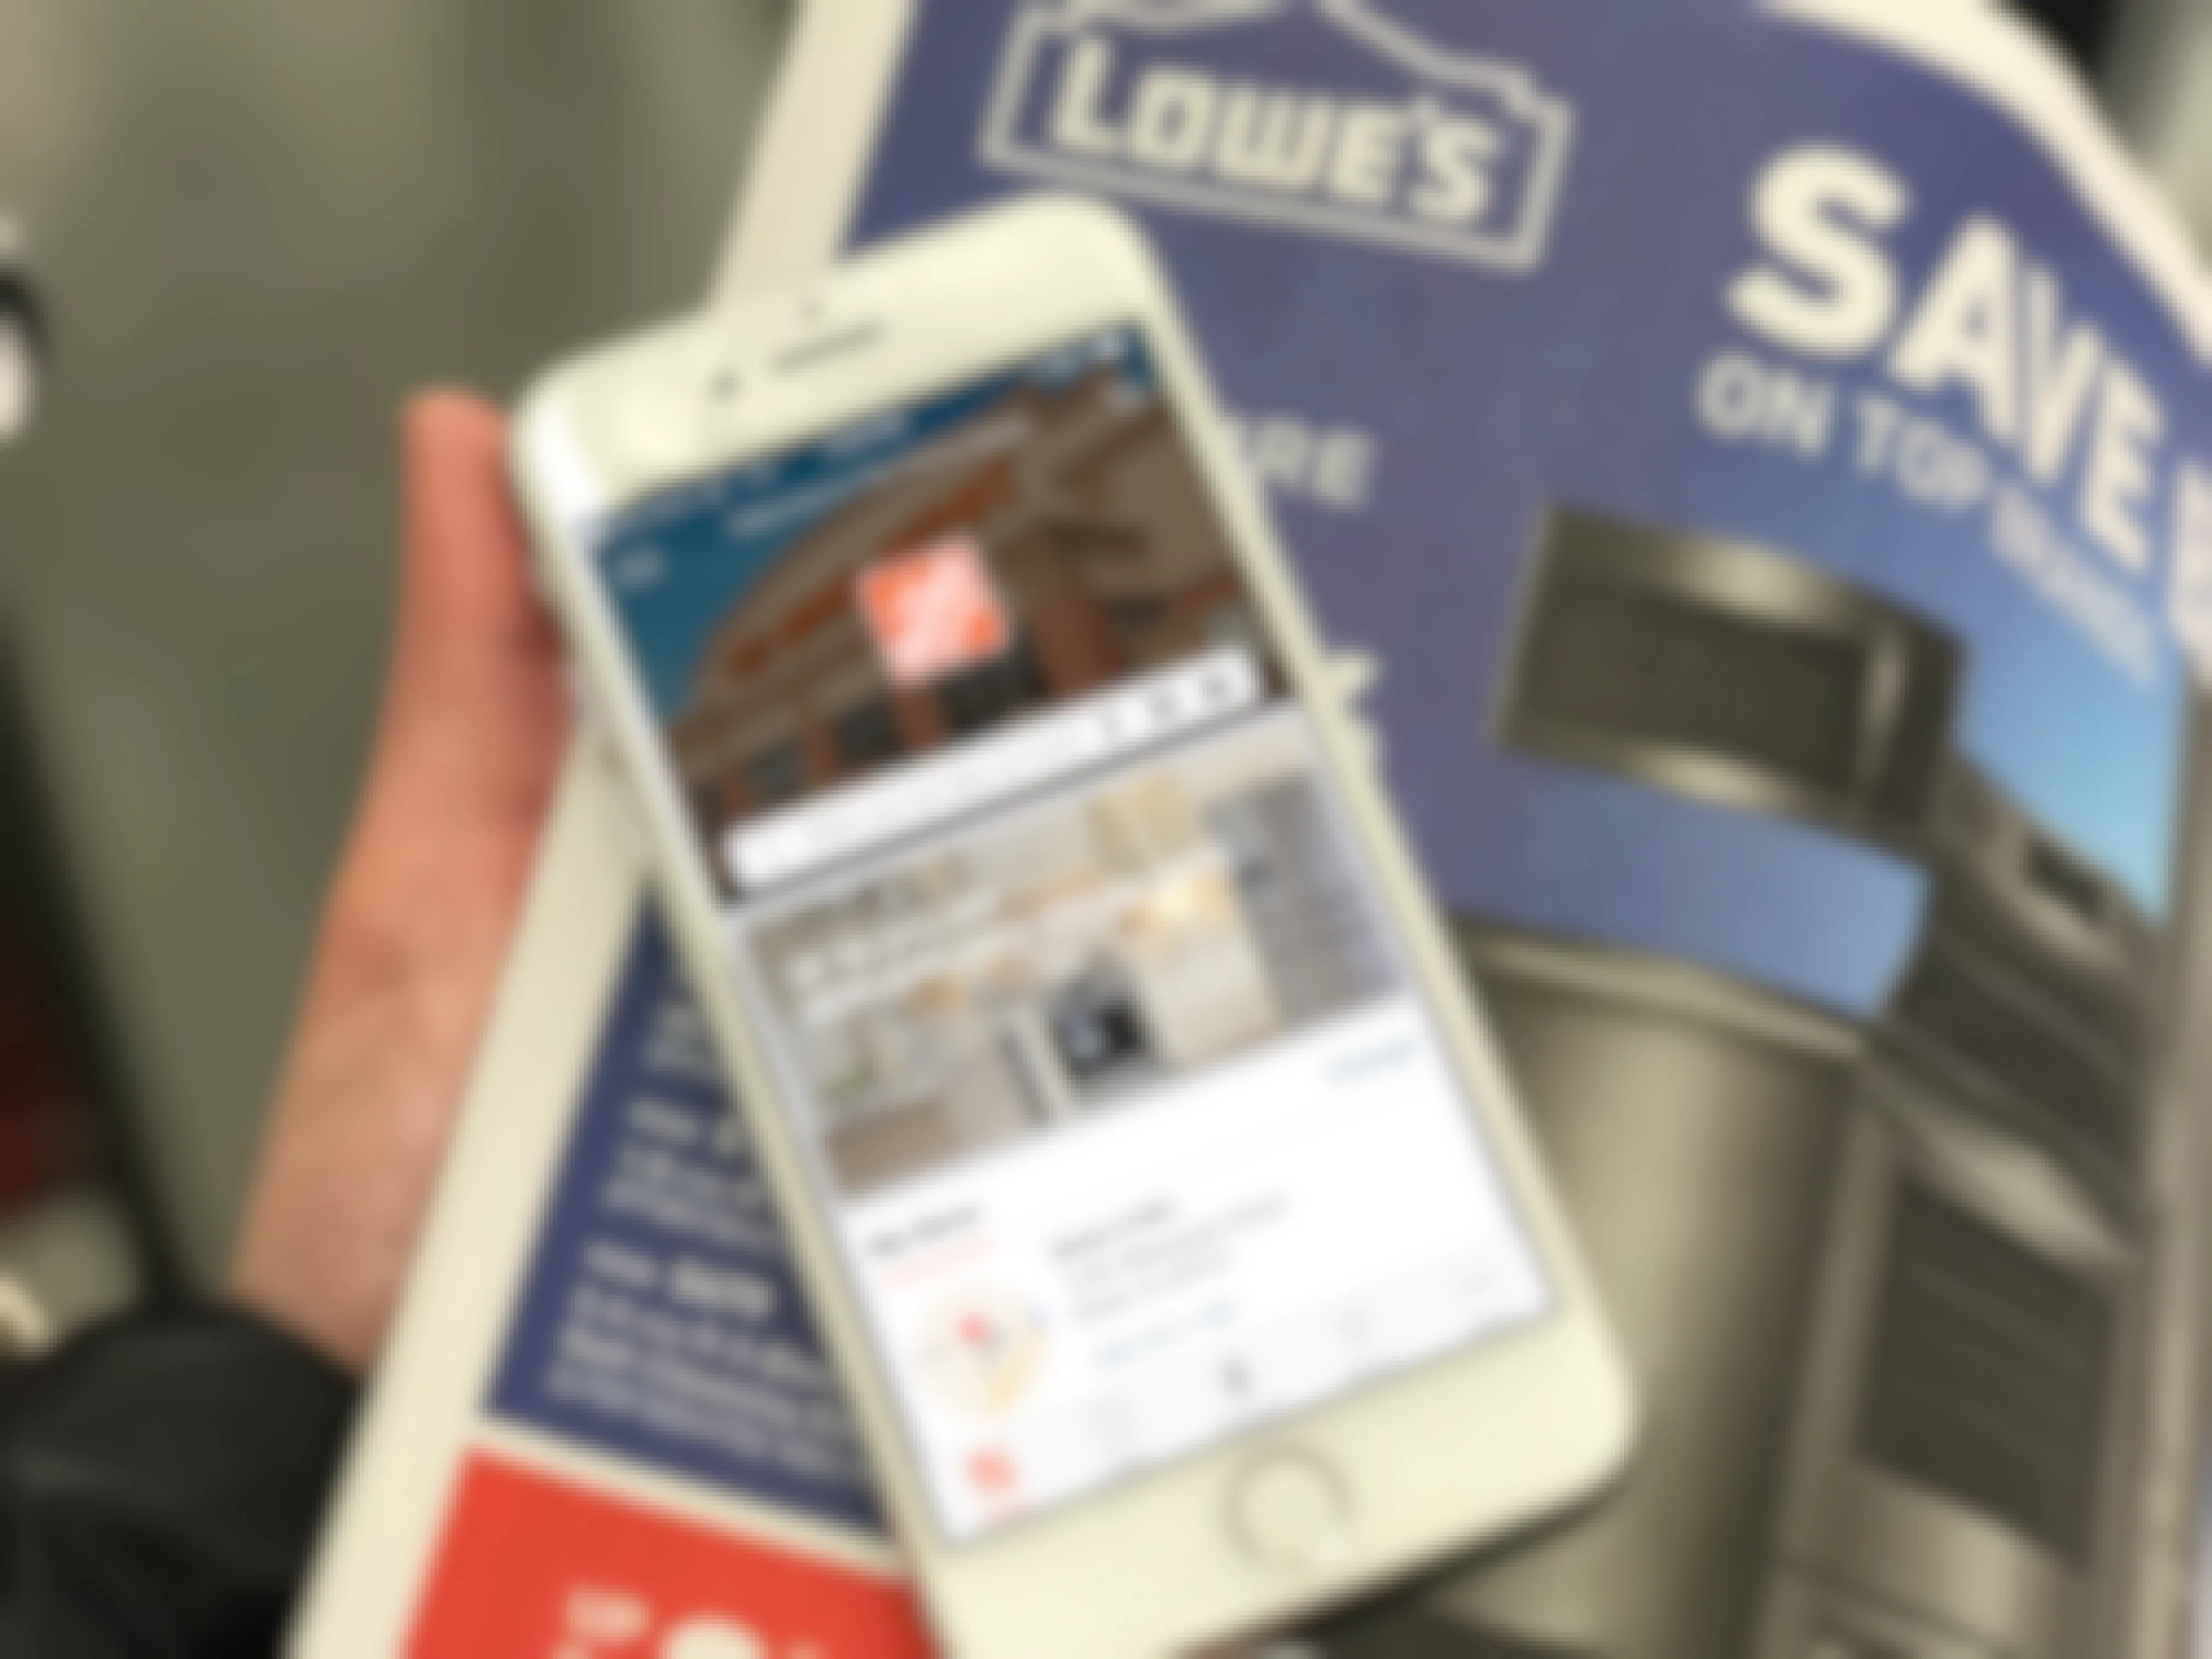 A cell phone displaying The Home Depot app, held on top of a Lowe's weekly advertisement.